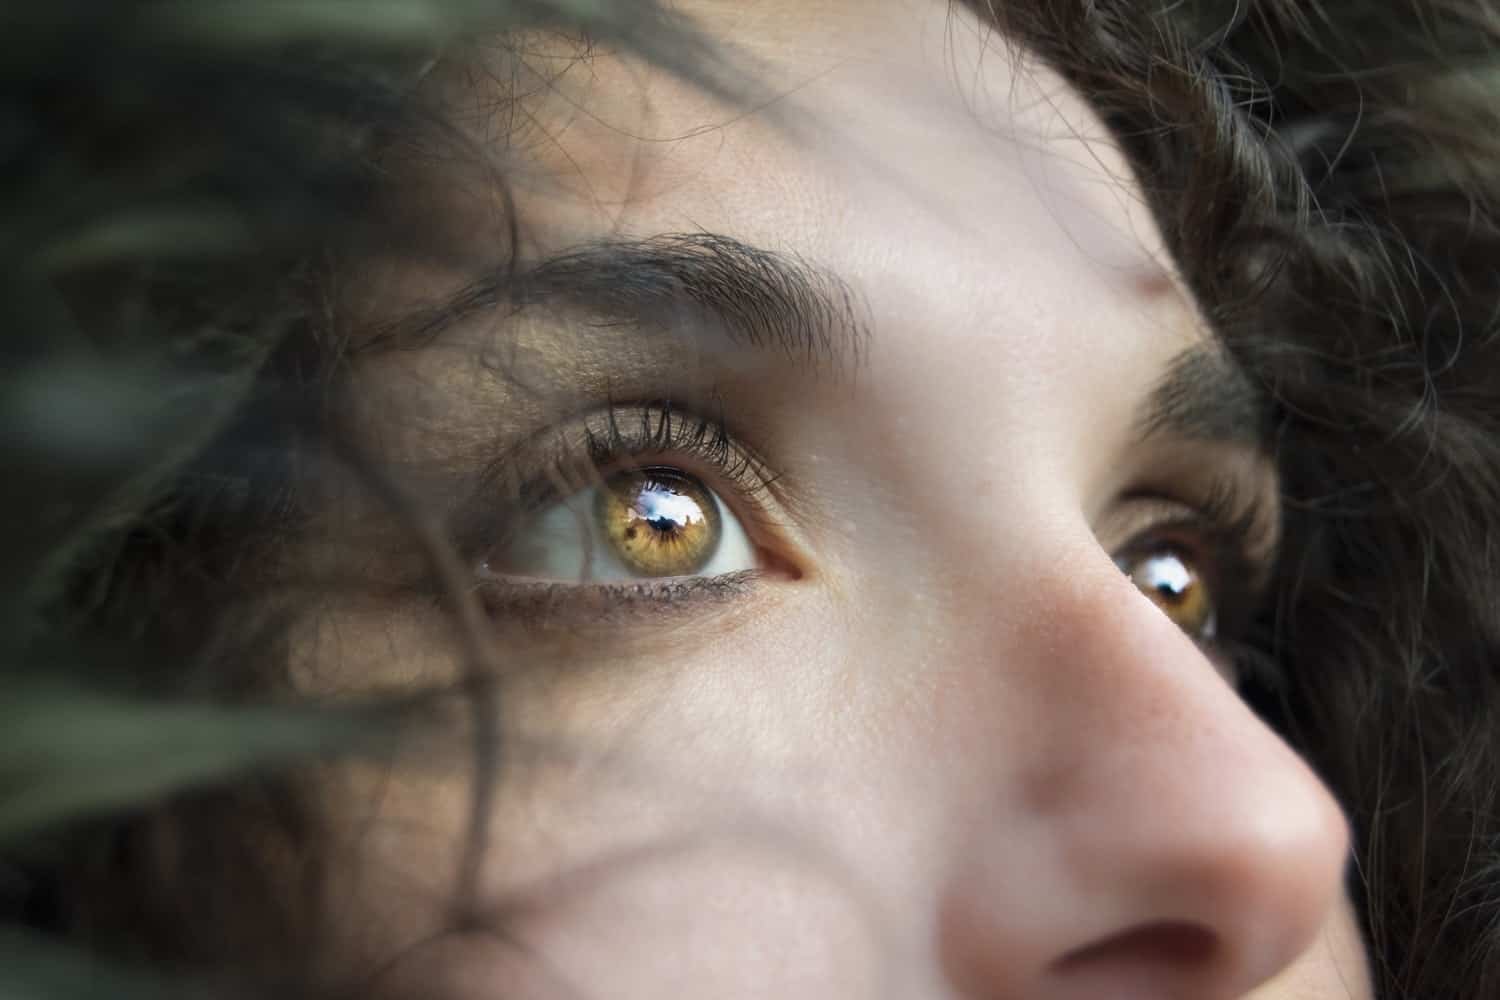 Close-up portraits should always focus on the eyes, as seen in this close-up of a woman's eyes.